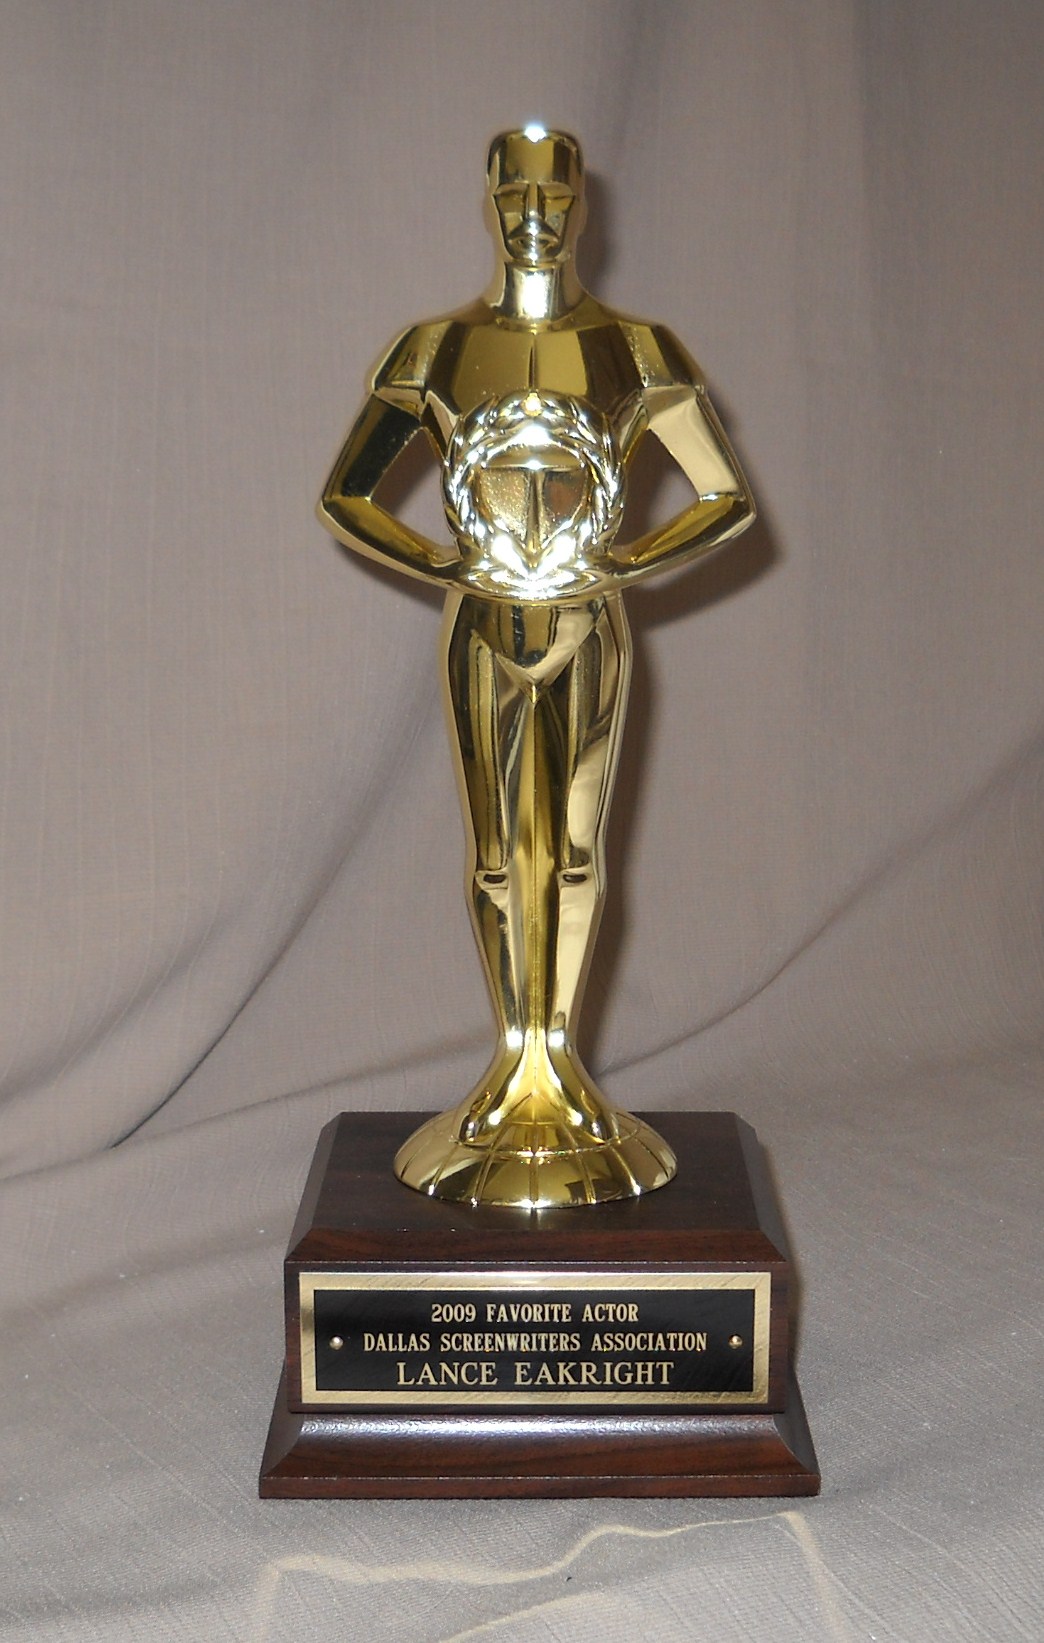 2009 Favorite Actor award from the Dallas Screenwriters Association.